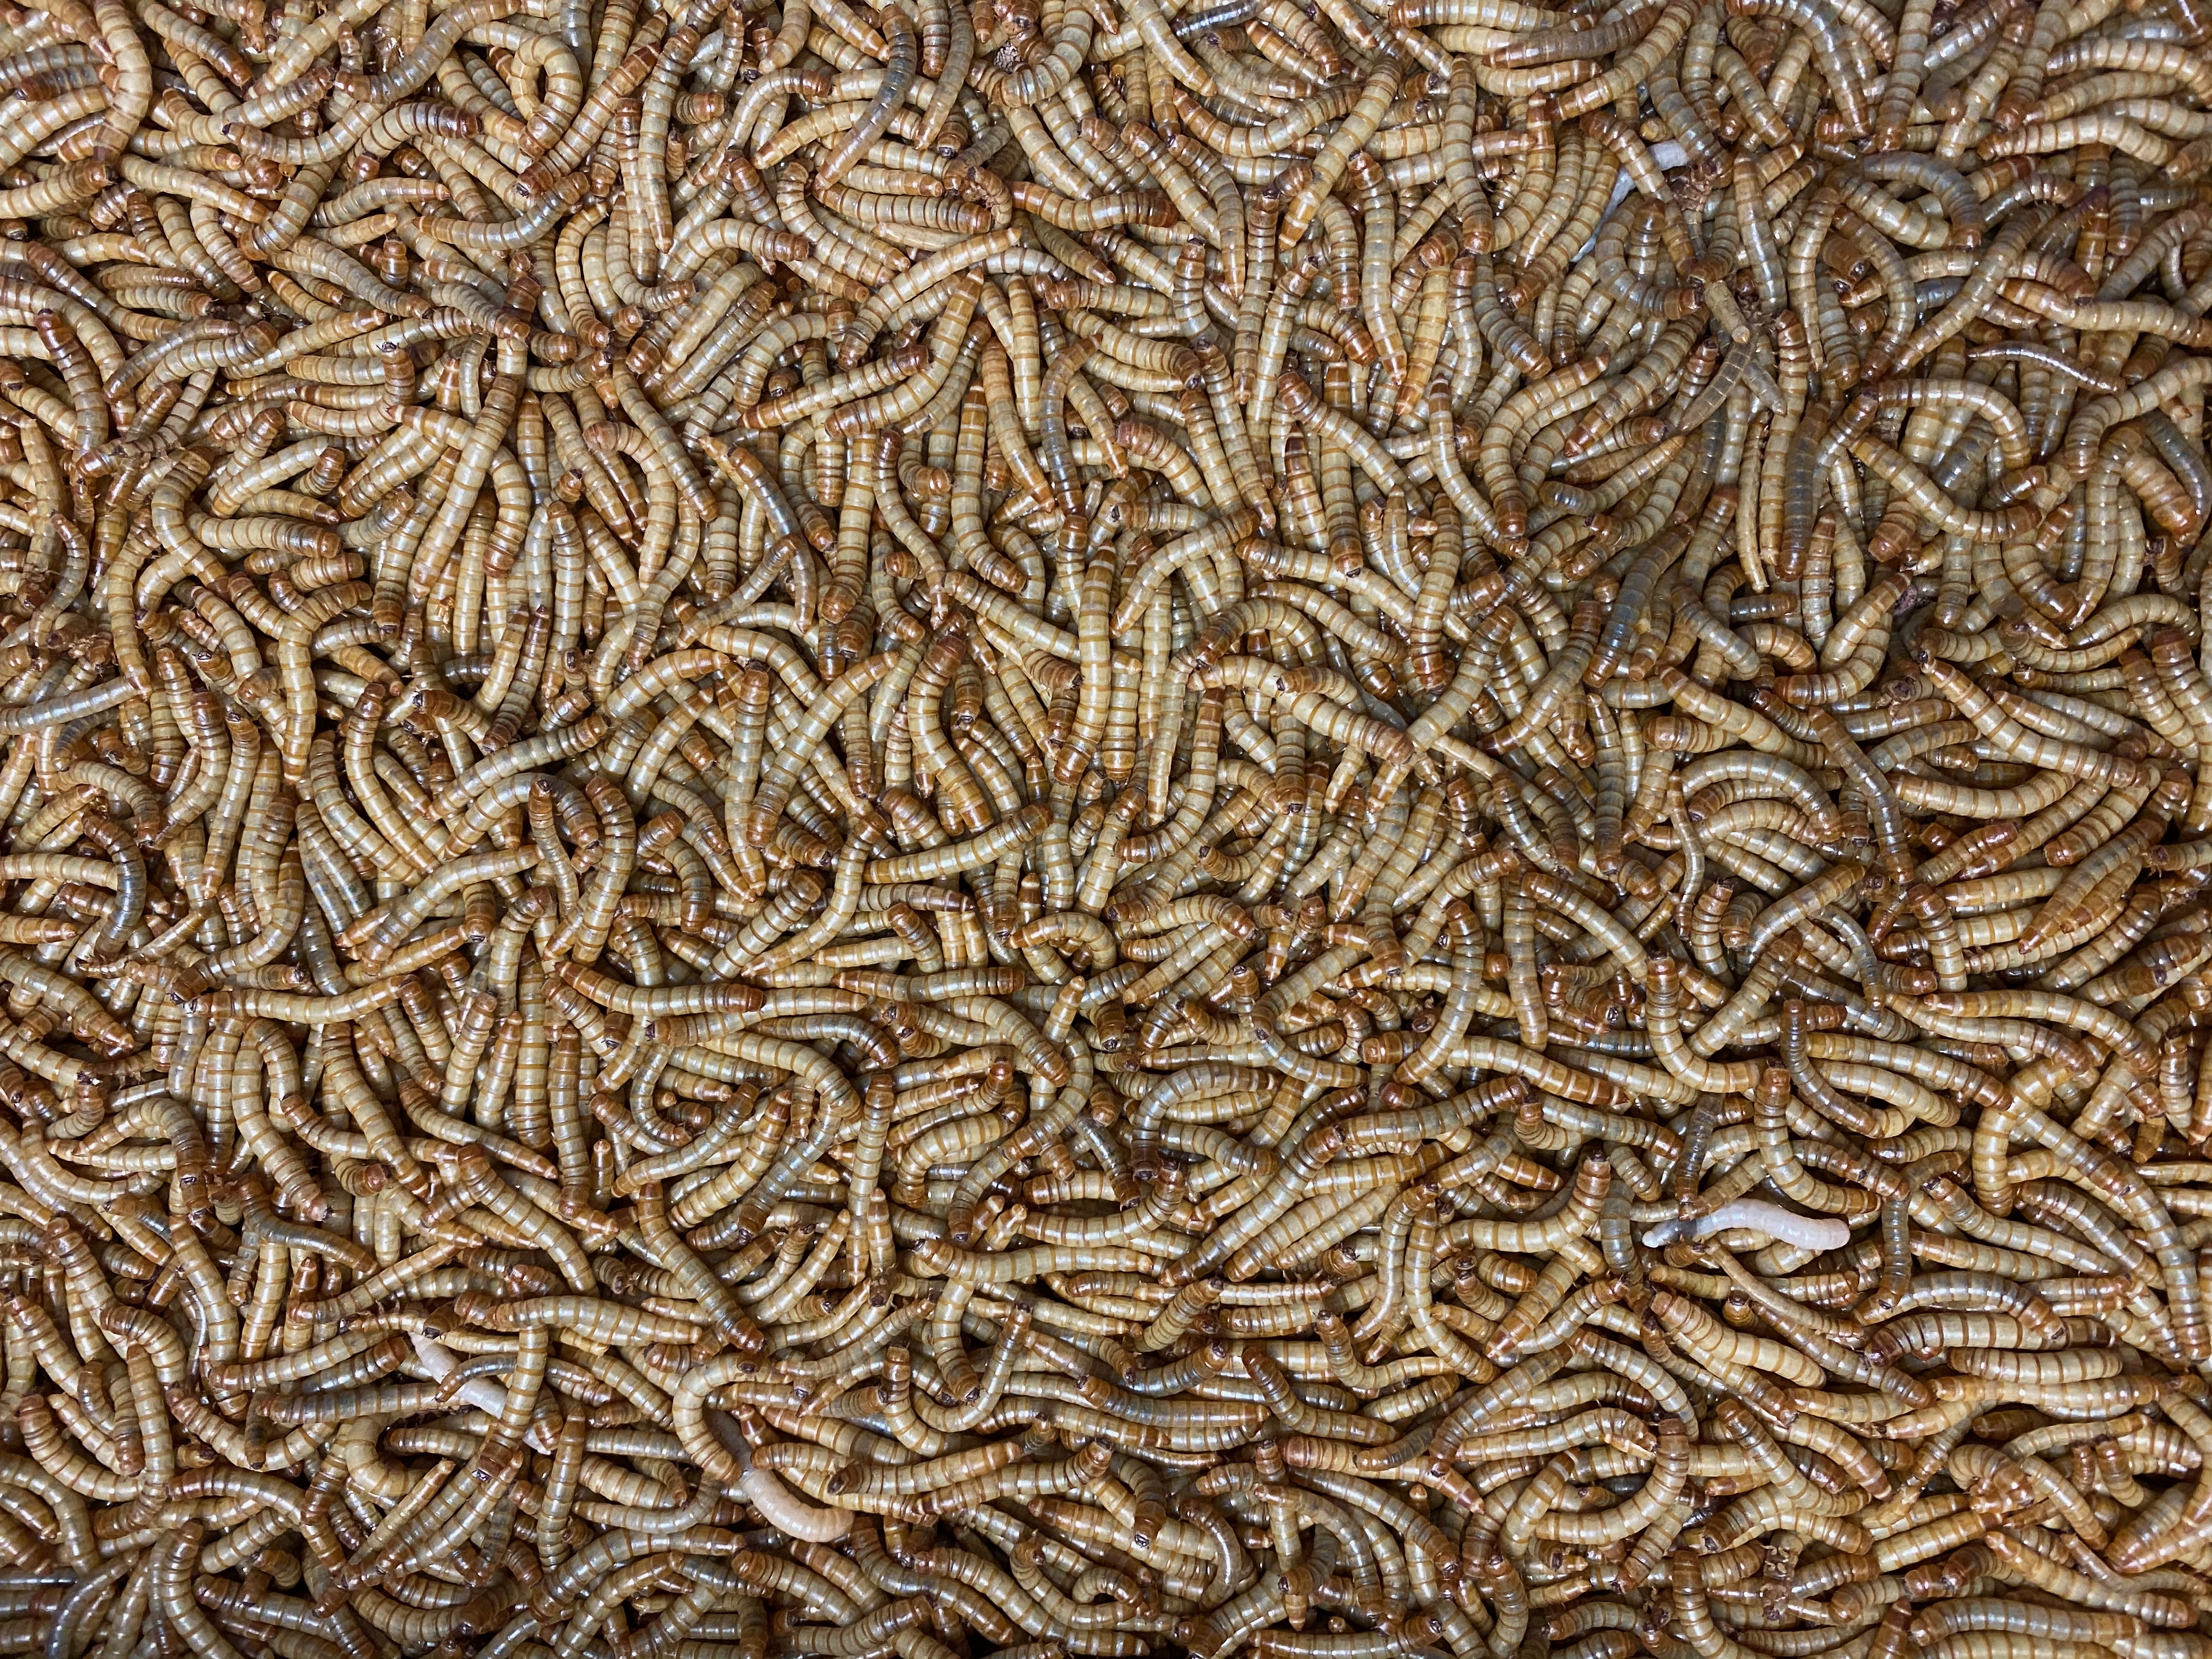 Thousands of brown mealworms.